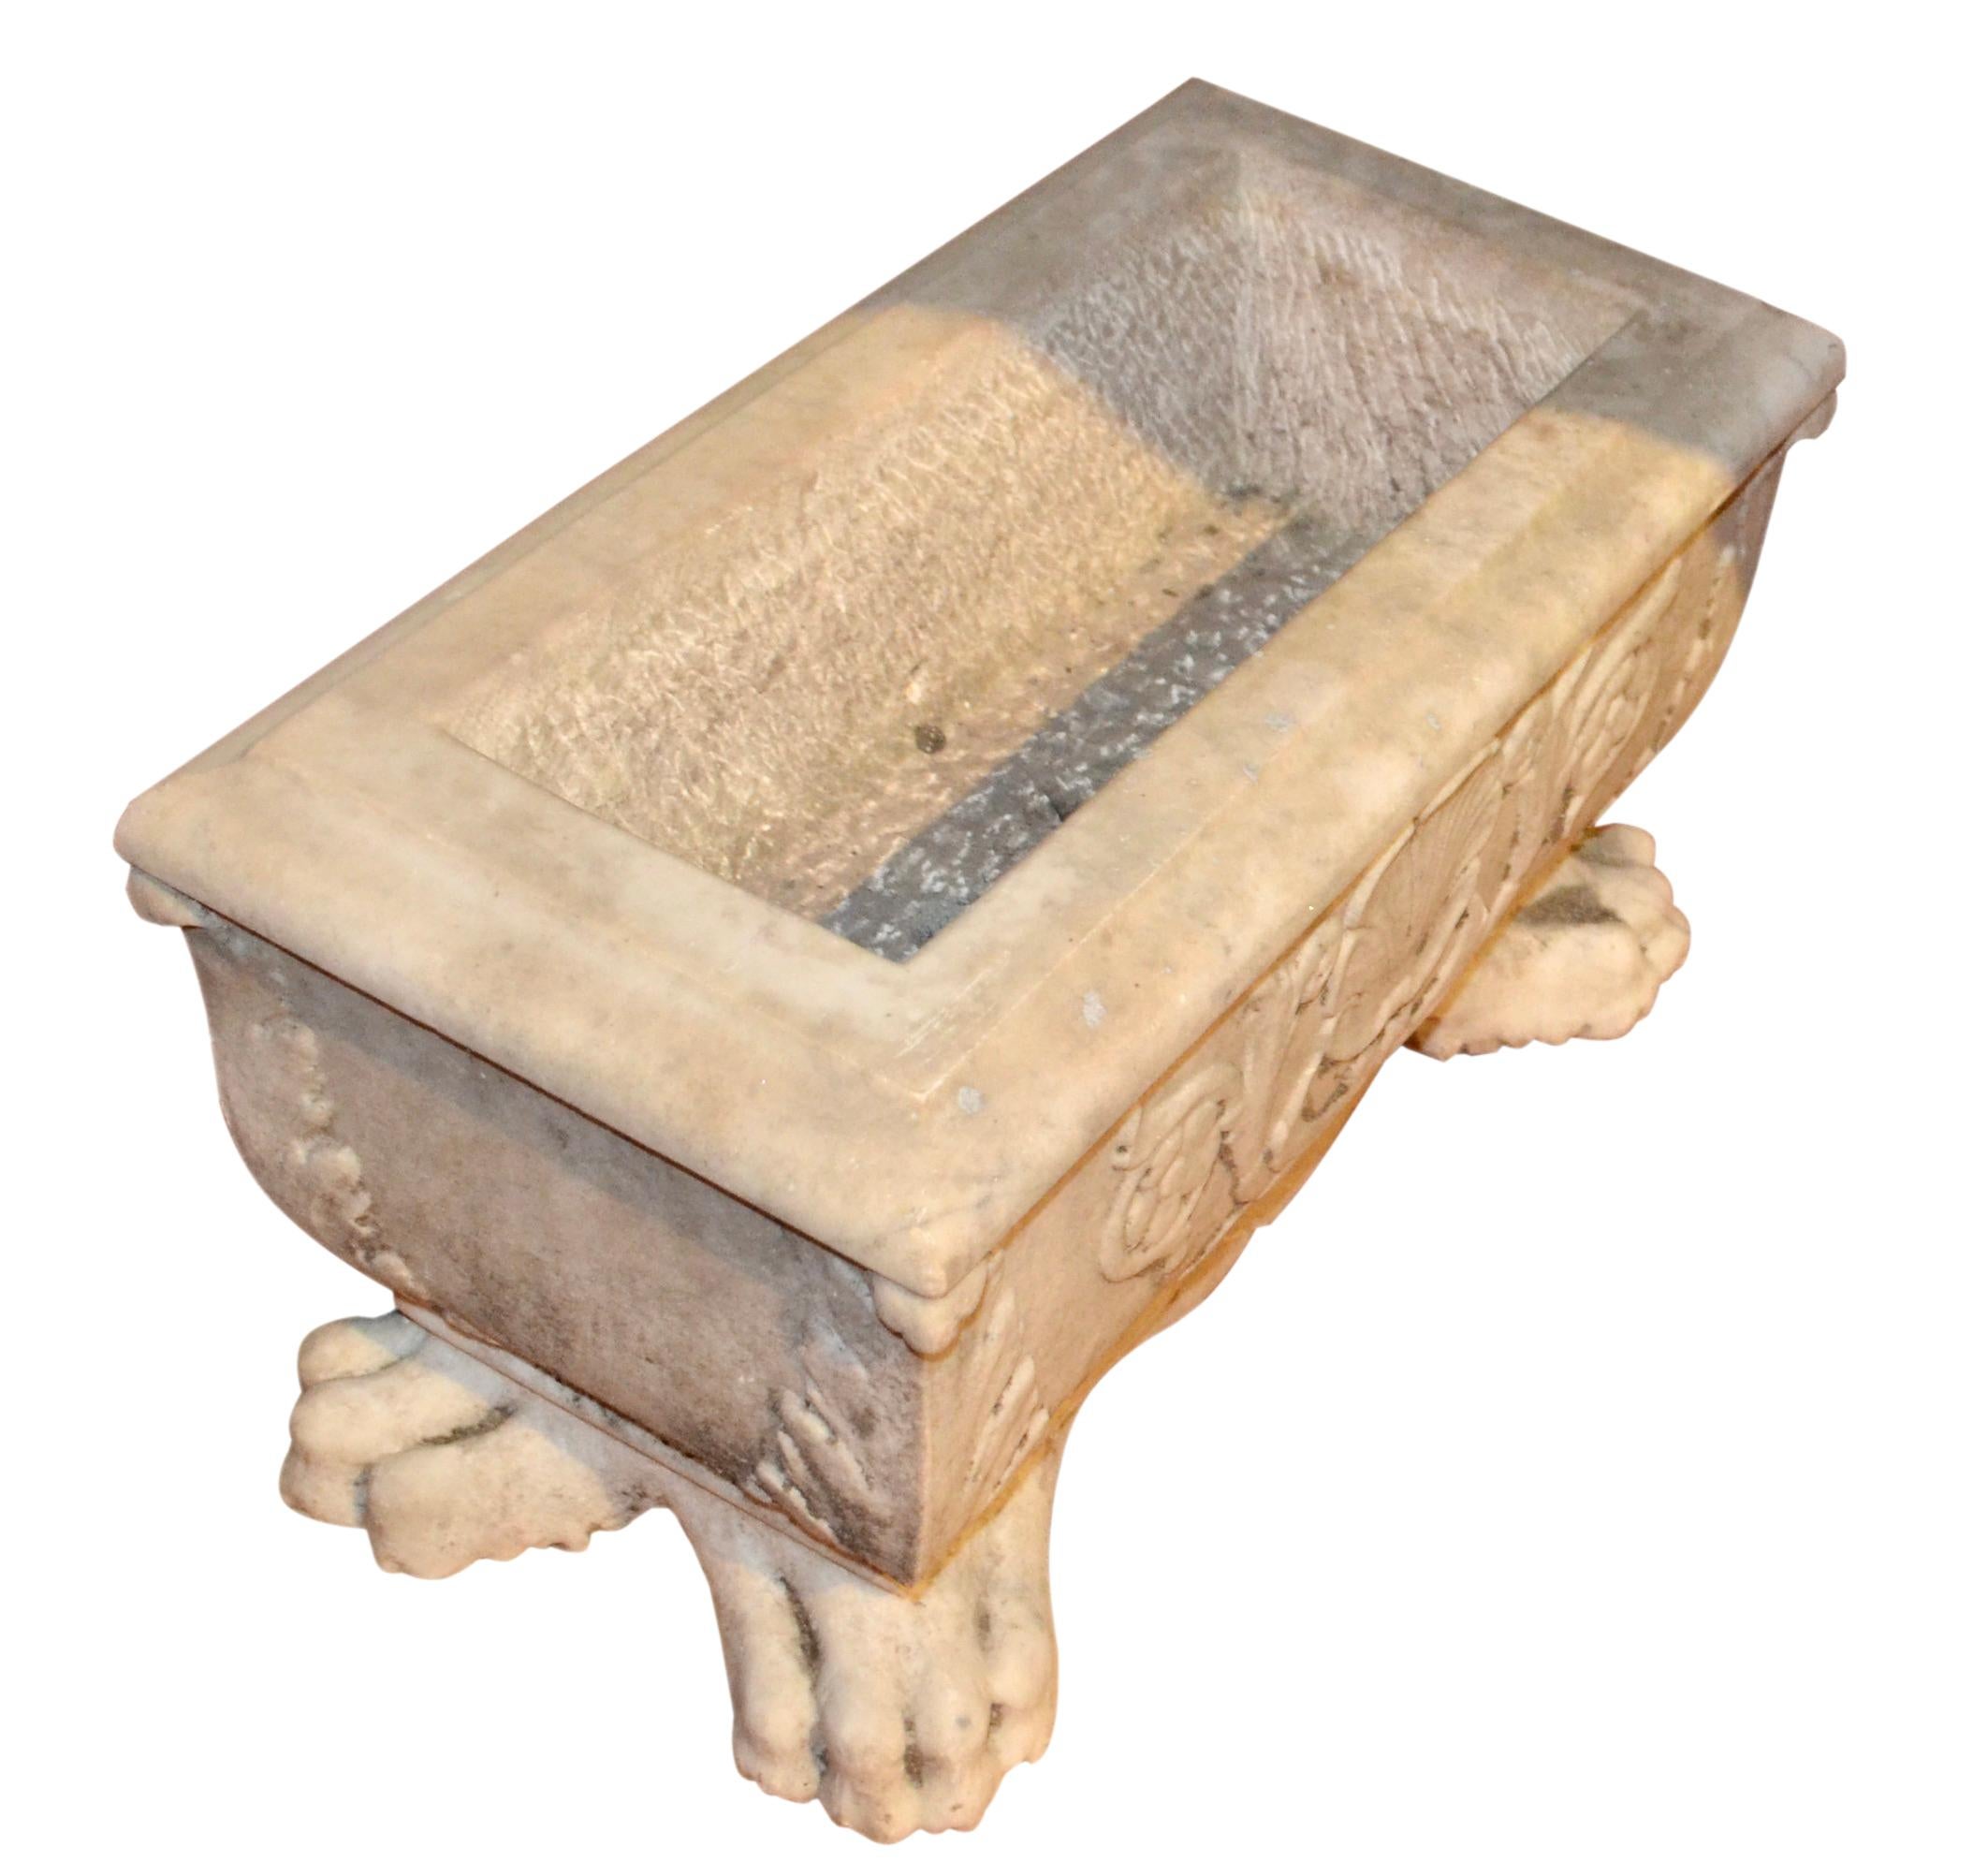 This classic planter is carved from a single piece of Carrara marble.  The wasted shaped pot sits on four large lions paw feet each of which are topped with a large carved acanthus leaf which continues up each corner to the top of the planter.  The